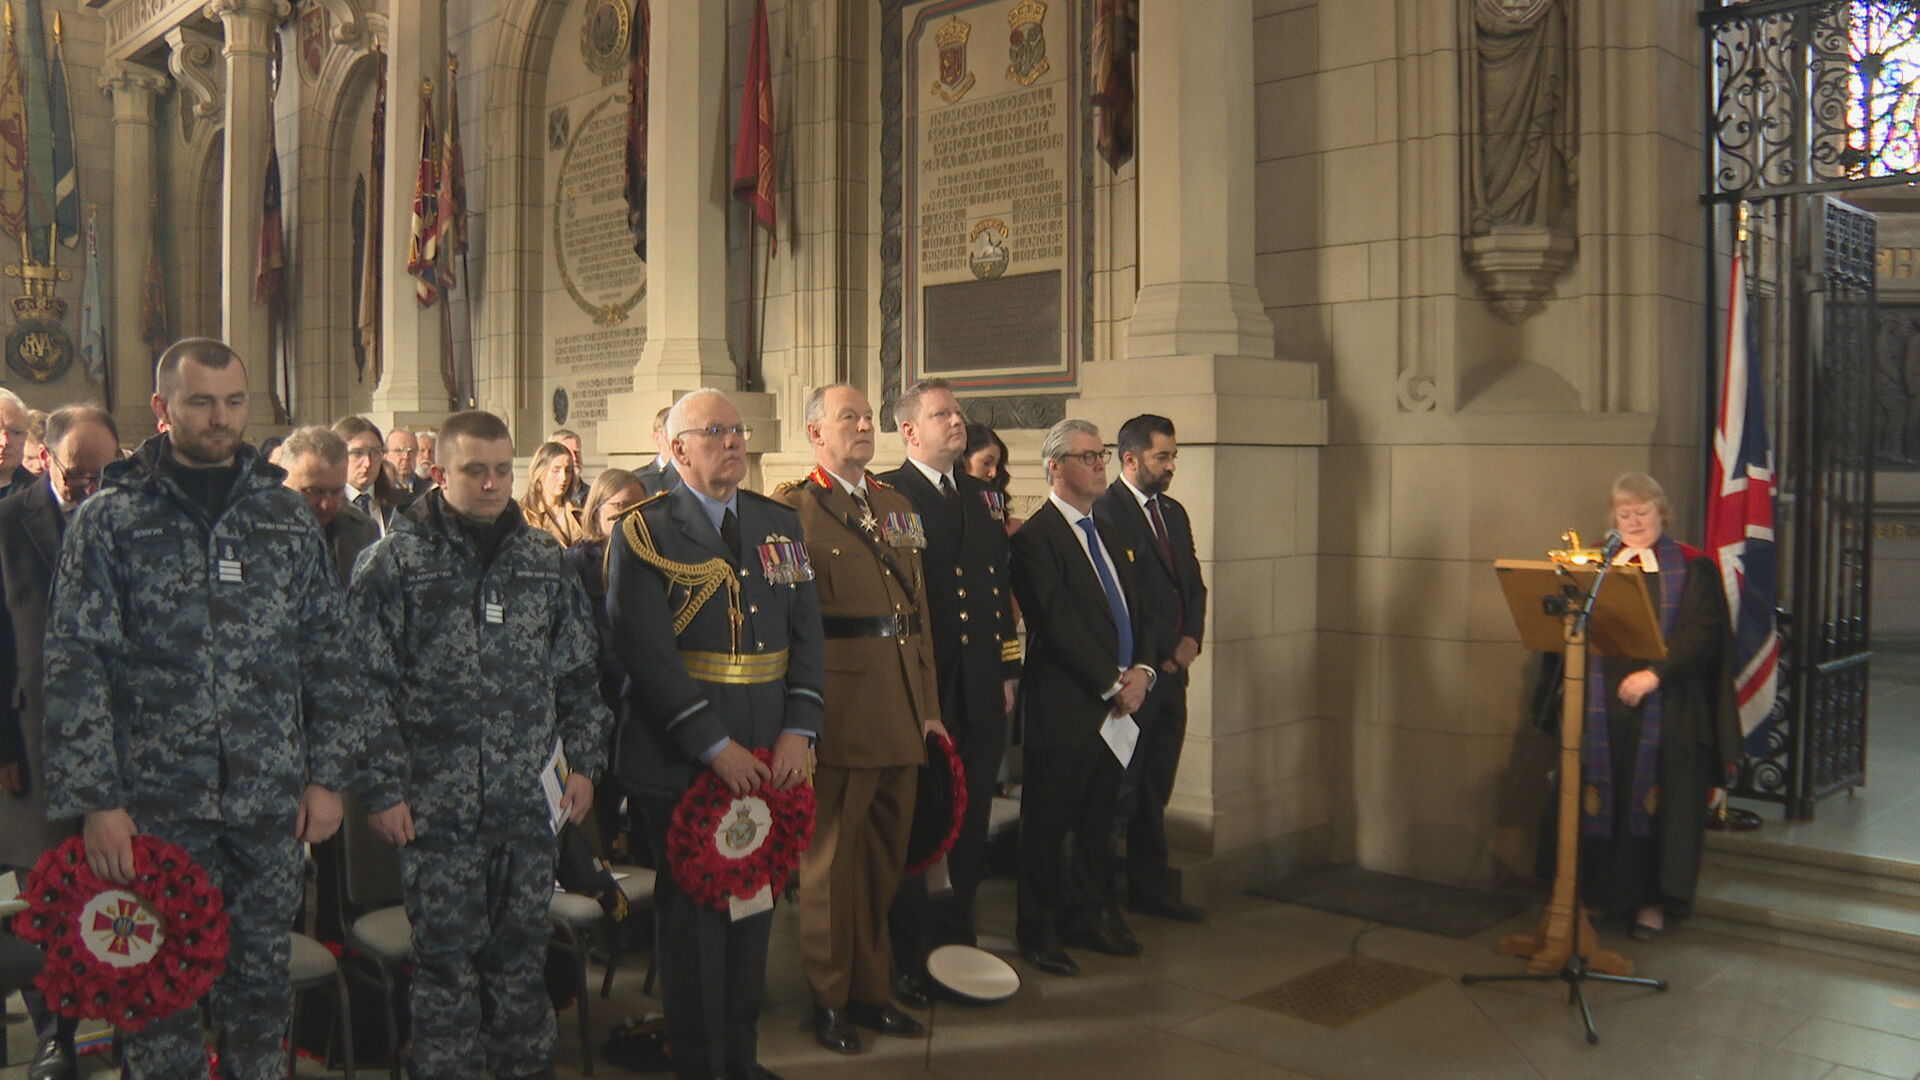 A service was held at Edinburgh Castle to mark the anniversary of the conflict. 